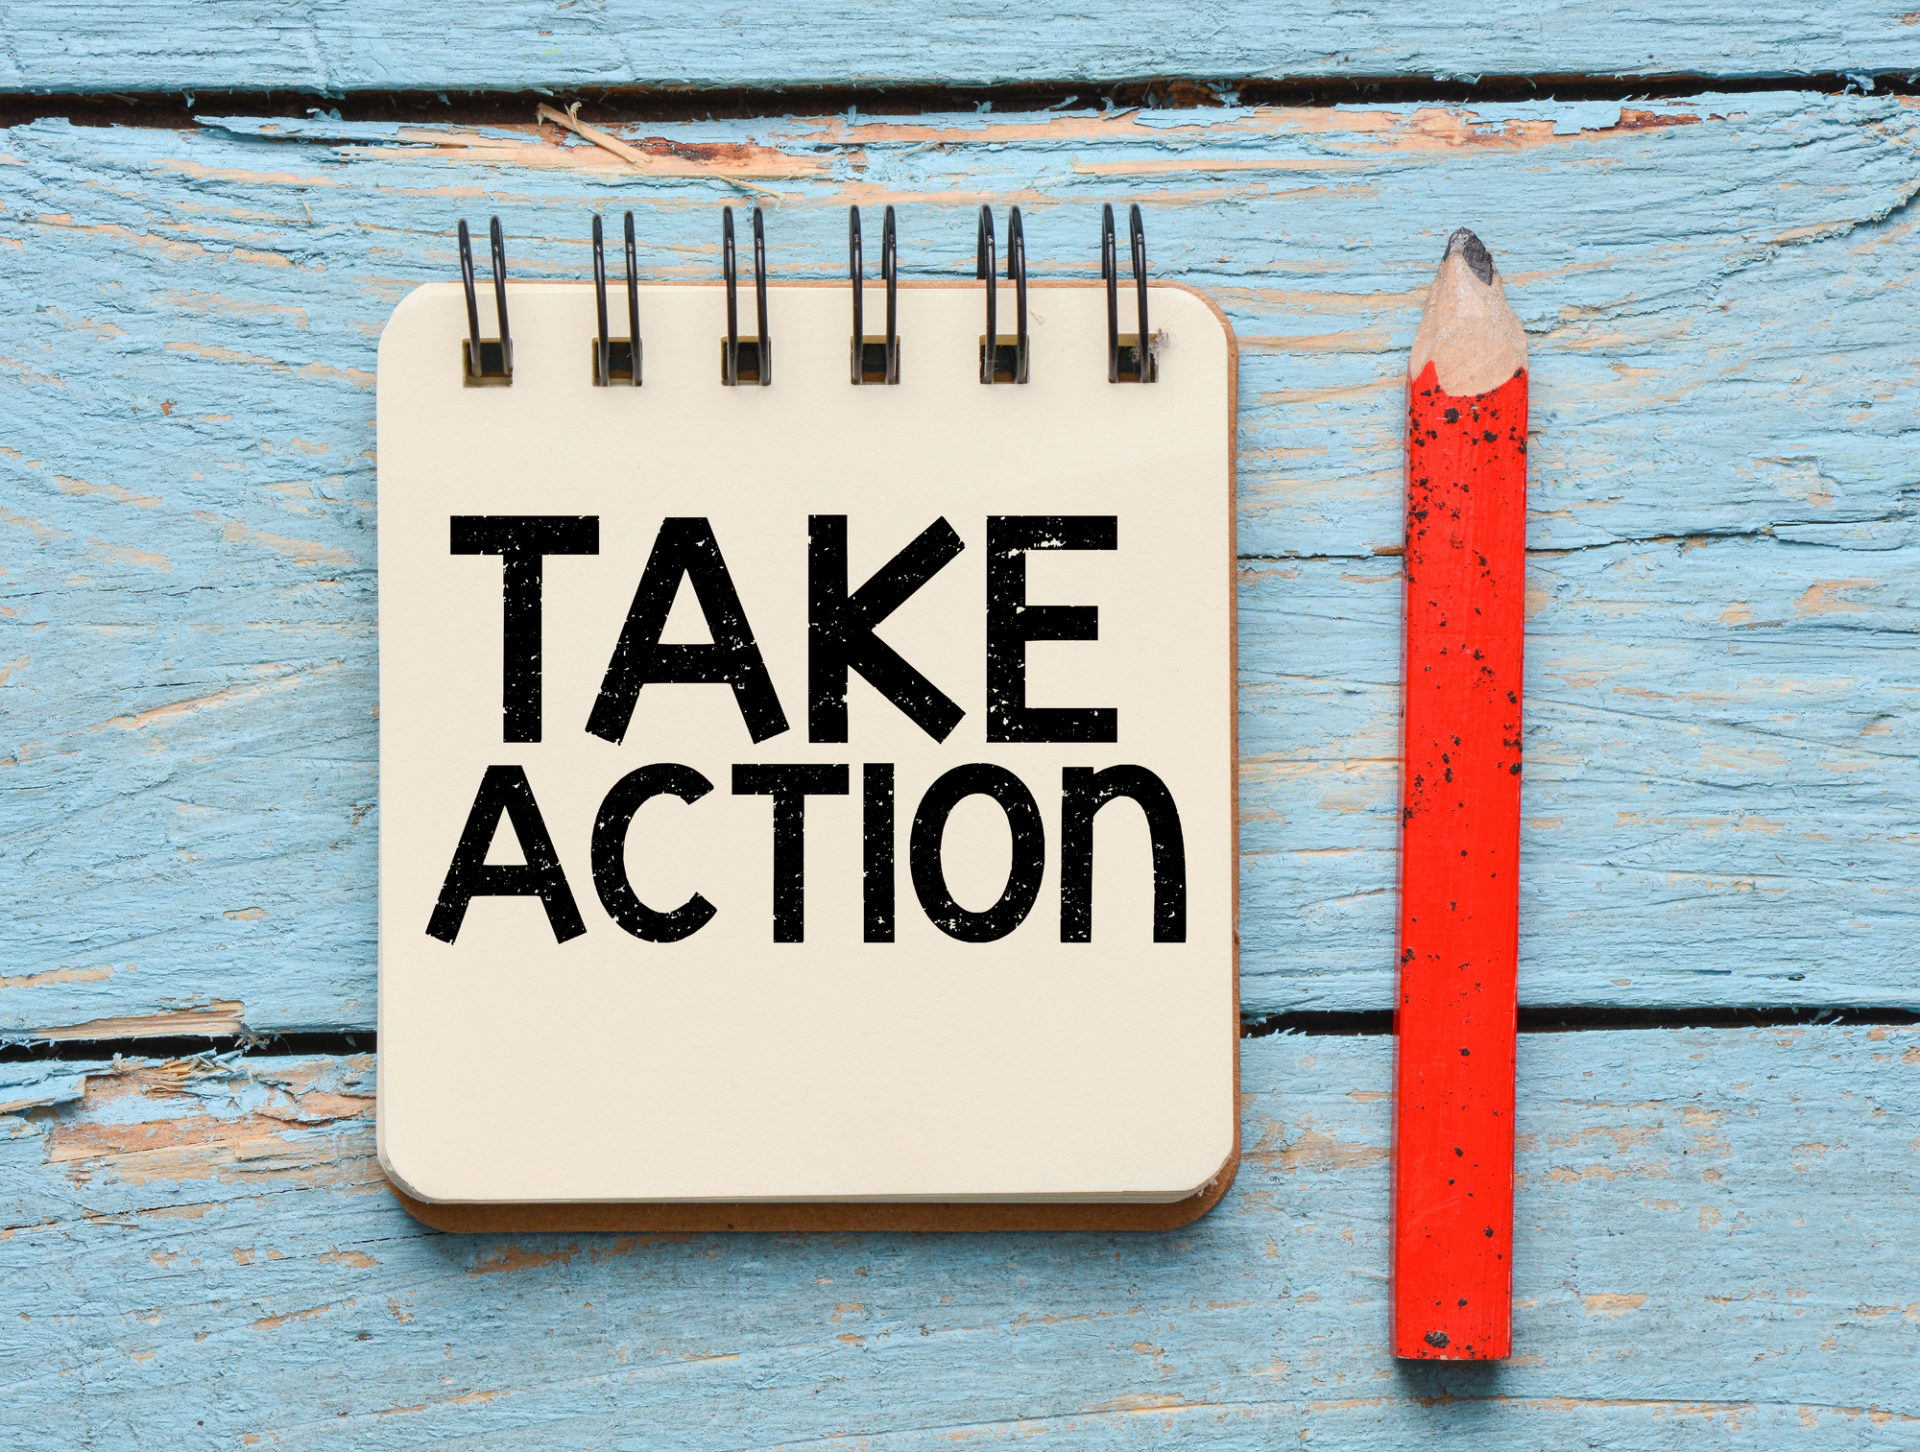 Actions rules. Take Action. Take Action картинка. Take Action одежда. Take Action примеры.